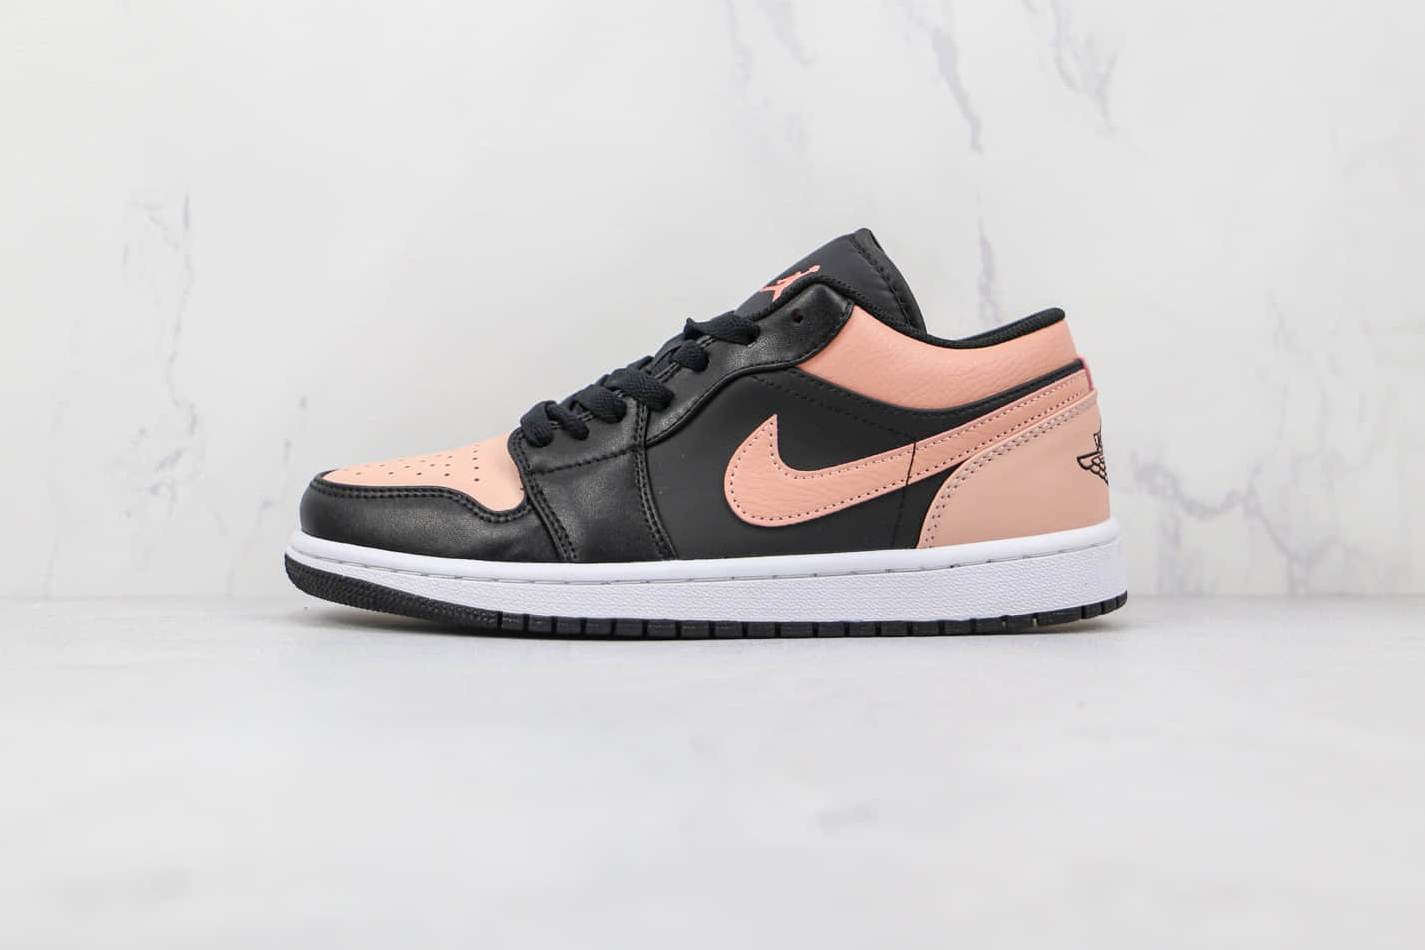 Air Jordan 1 Low 'Cyber' CK3022-003: Stylish and Trendy Sneakers | Limited Stock